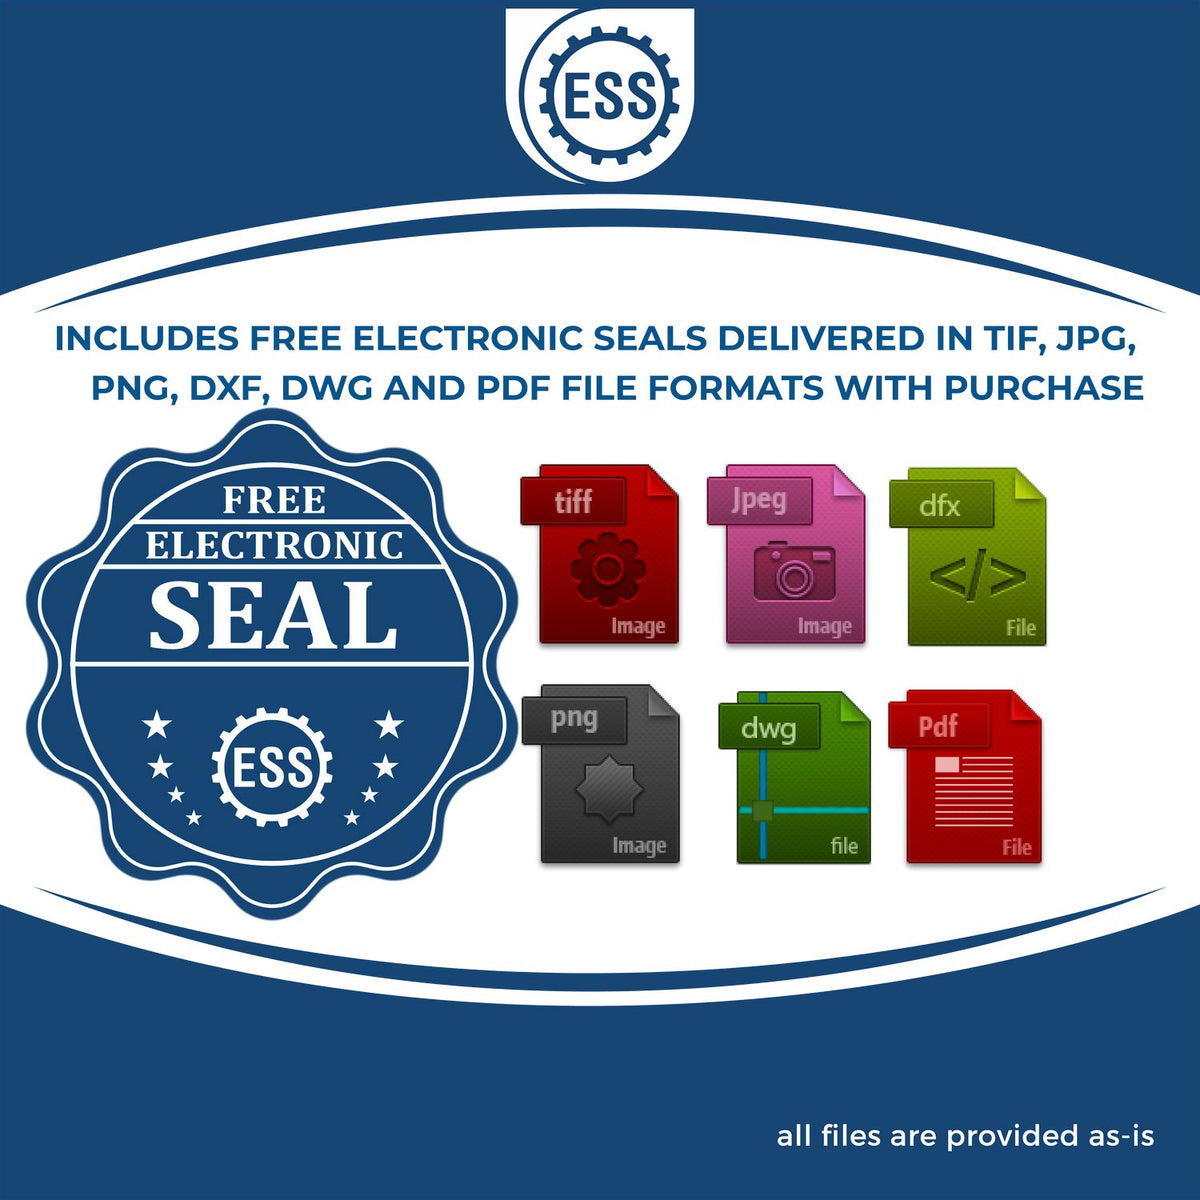 An infographic for the free electronic seal for the Heavy Duty Cast Iron Connecticut Architect Embosser illustrating the different file type icons such as DXF, DWG, TIF, JPG and PNG.